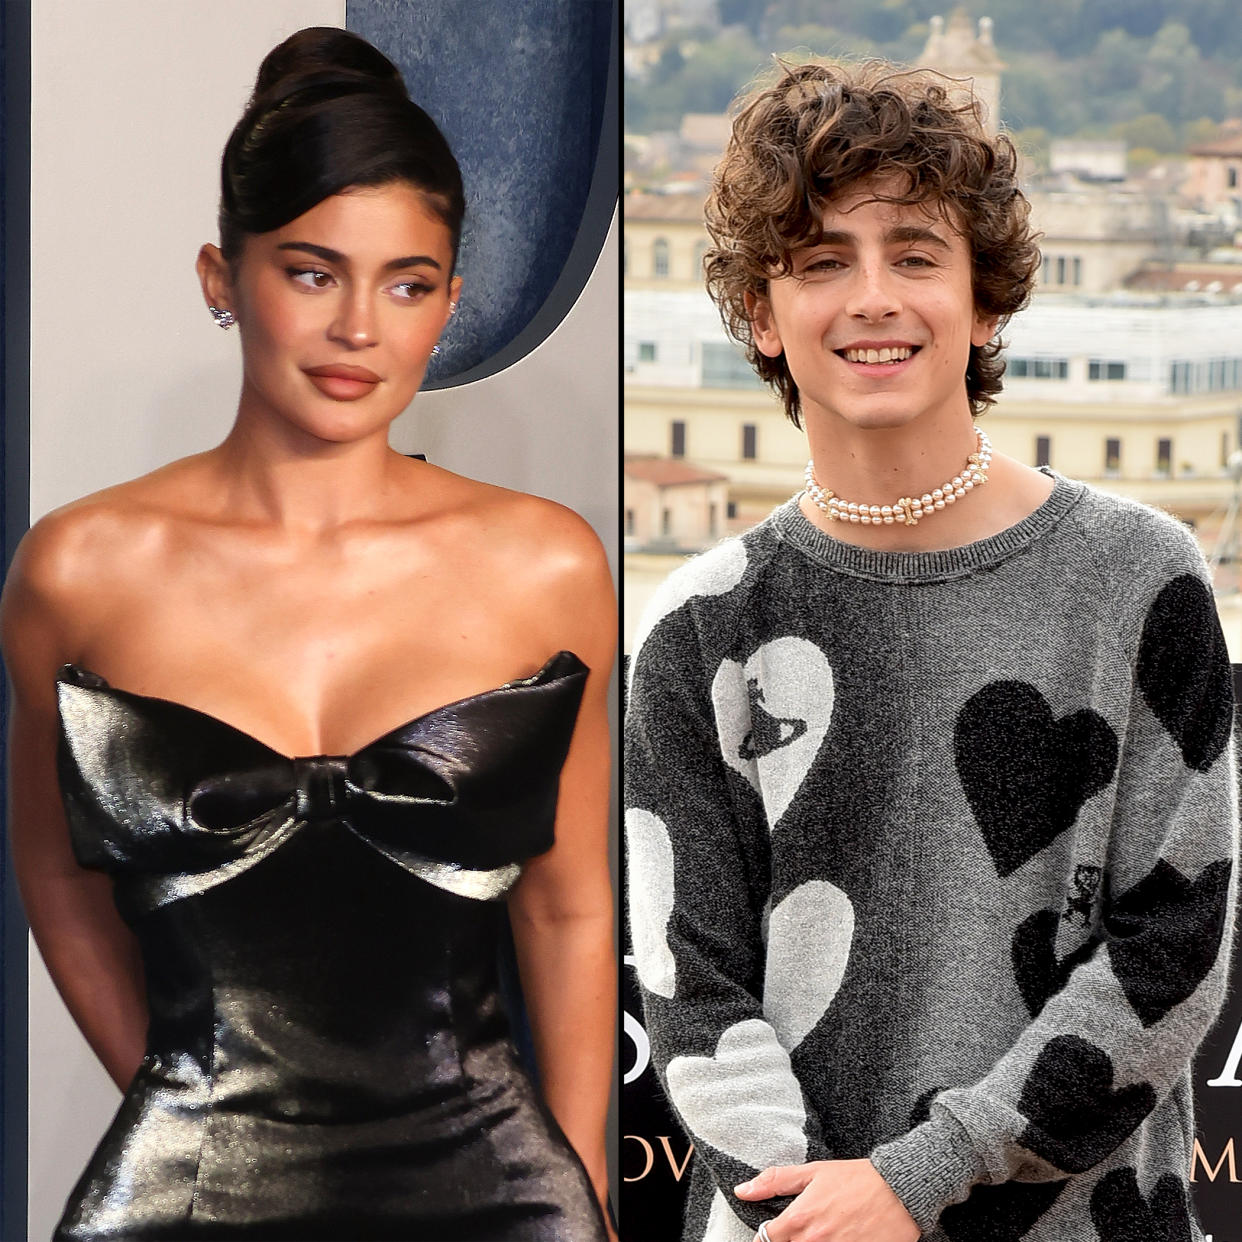 Inside Kylie Jenner and Timothee Chalamet’s ‘New’ Romance: 'Things Aren't That Serious' Yet